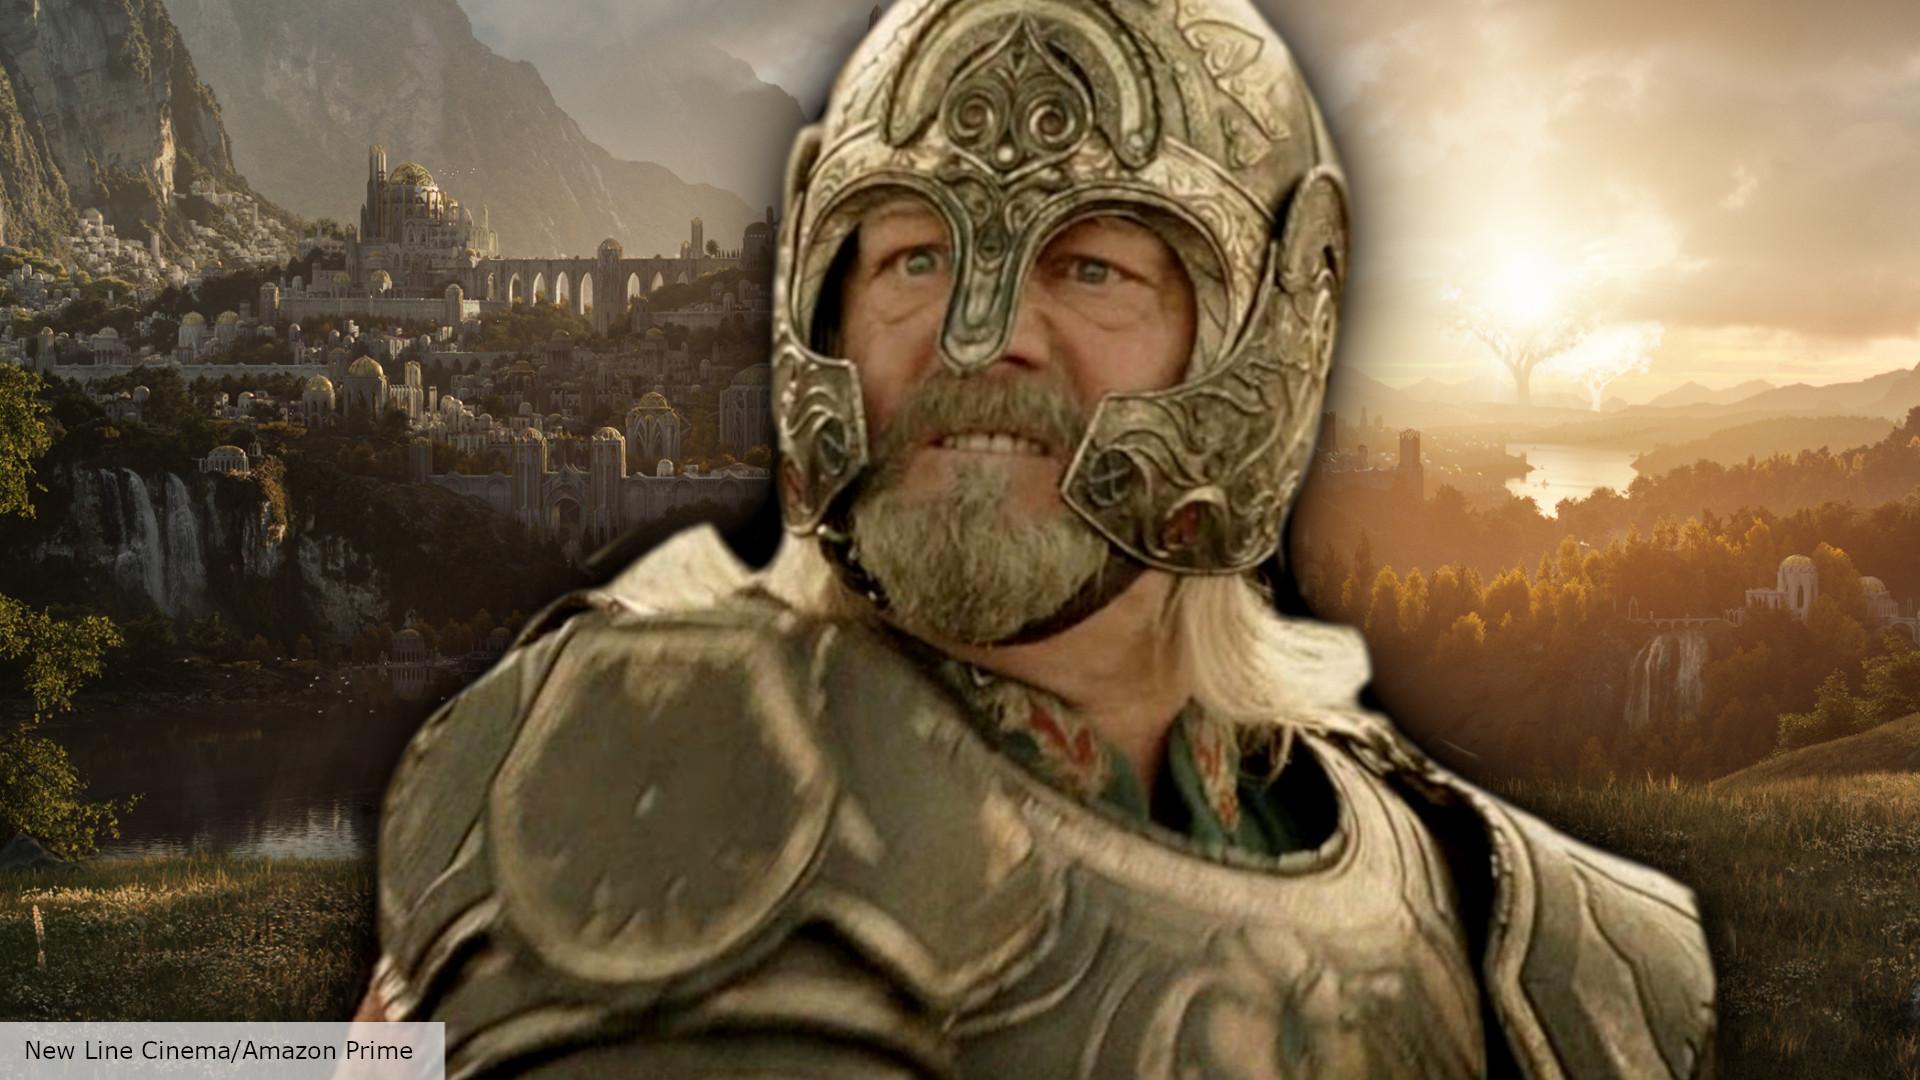 War Of The Rohirrim Explained: What Lord Of The Rings' Anime Movie Is About